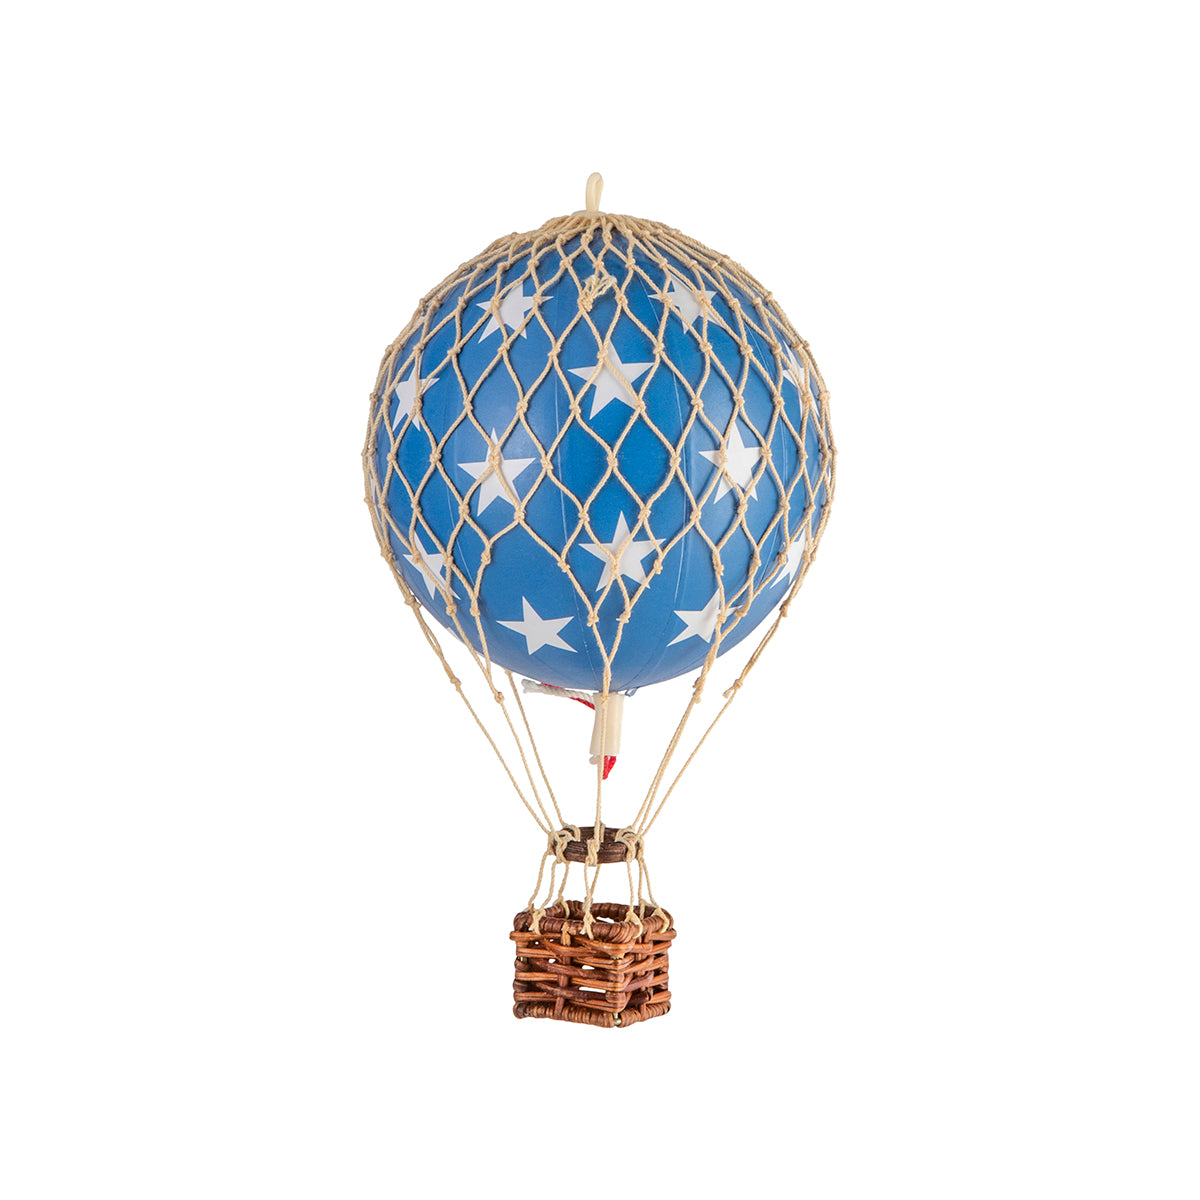 A Wonderen Extra Small Hot Air Balloon - Floating The Skies with stars on it takes you on an adventure.